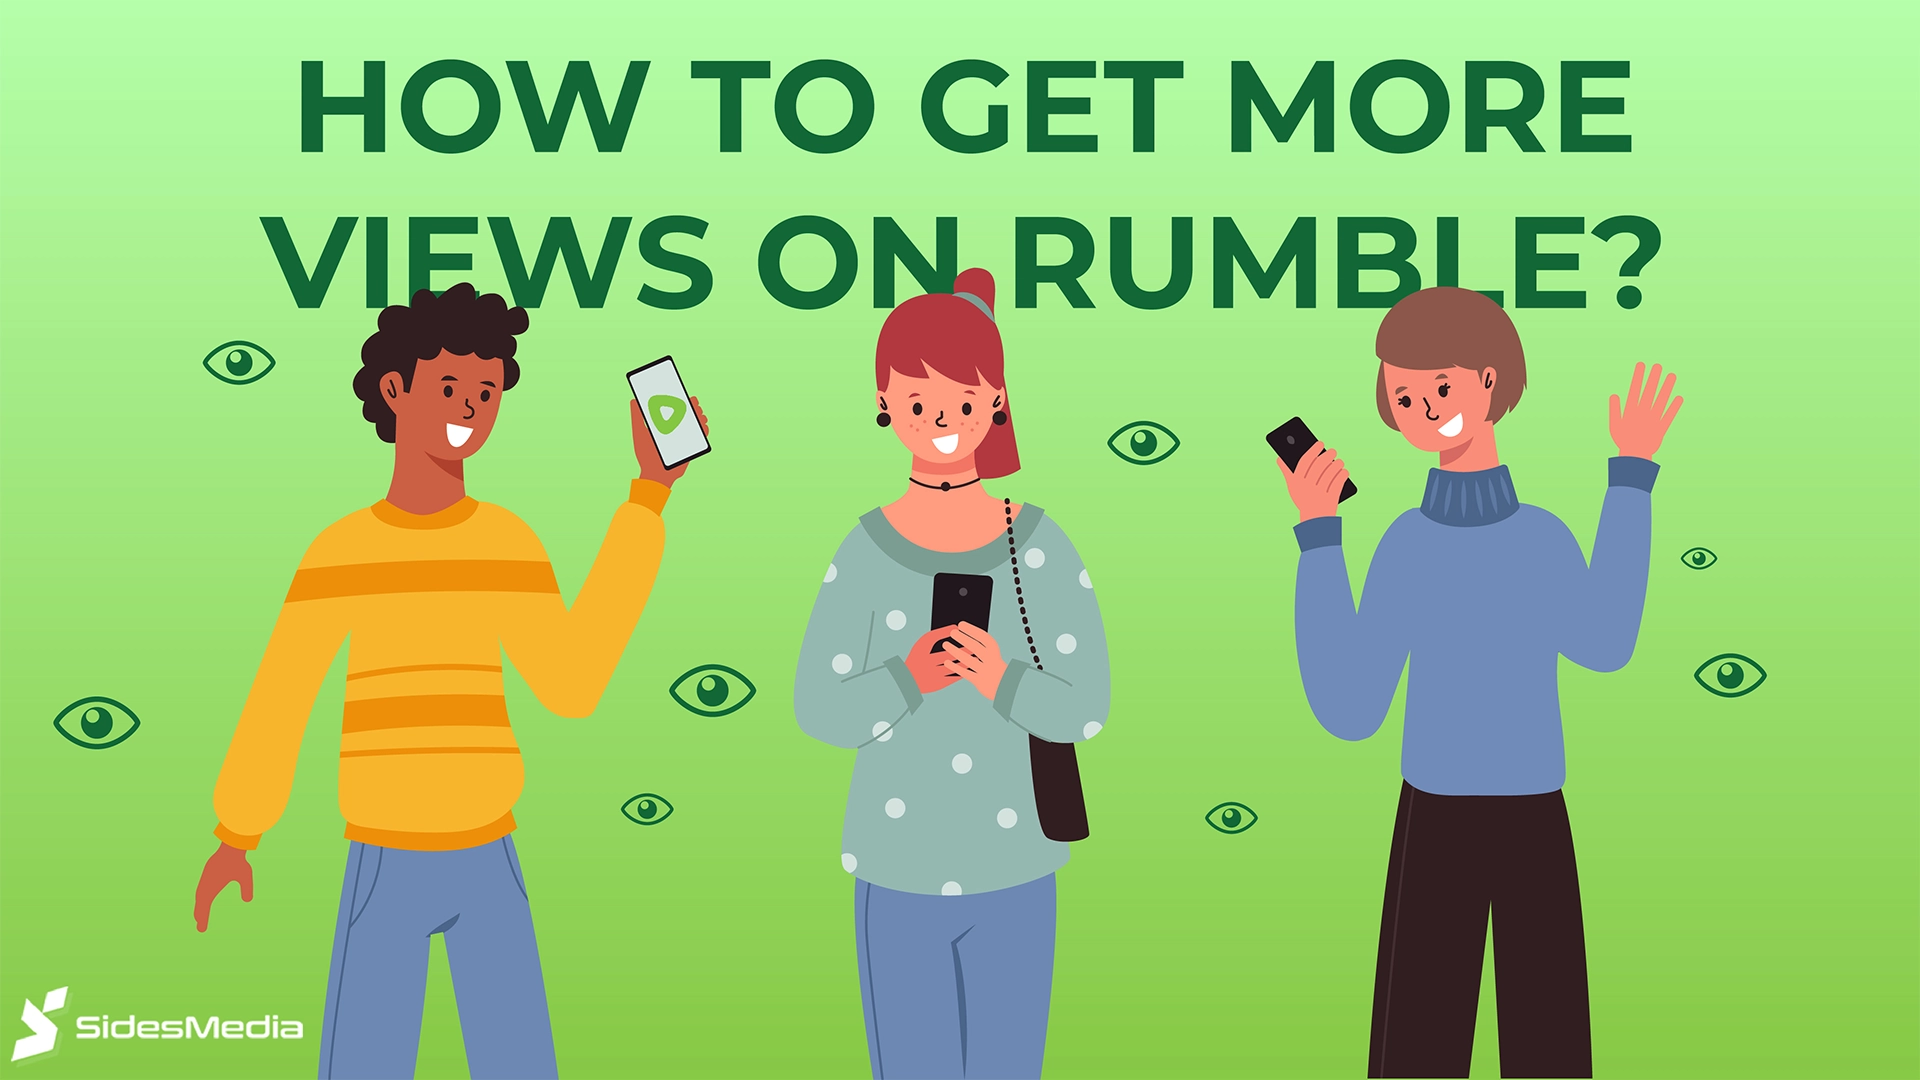 13 Quick Ways How to Get More Views on Rumble